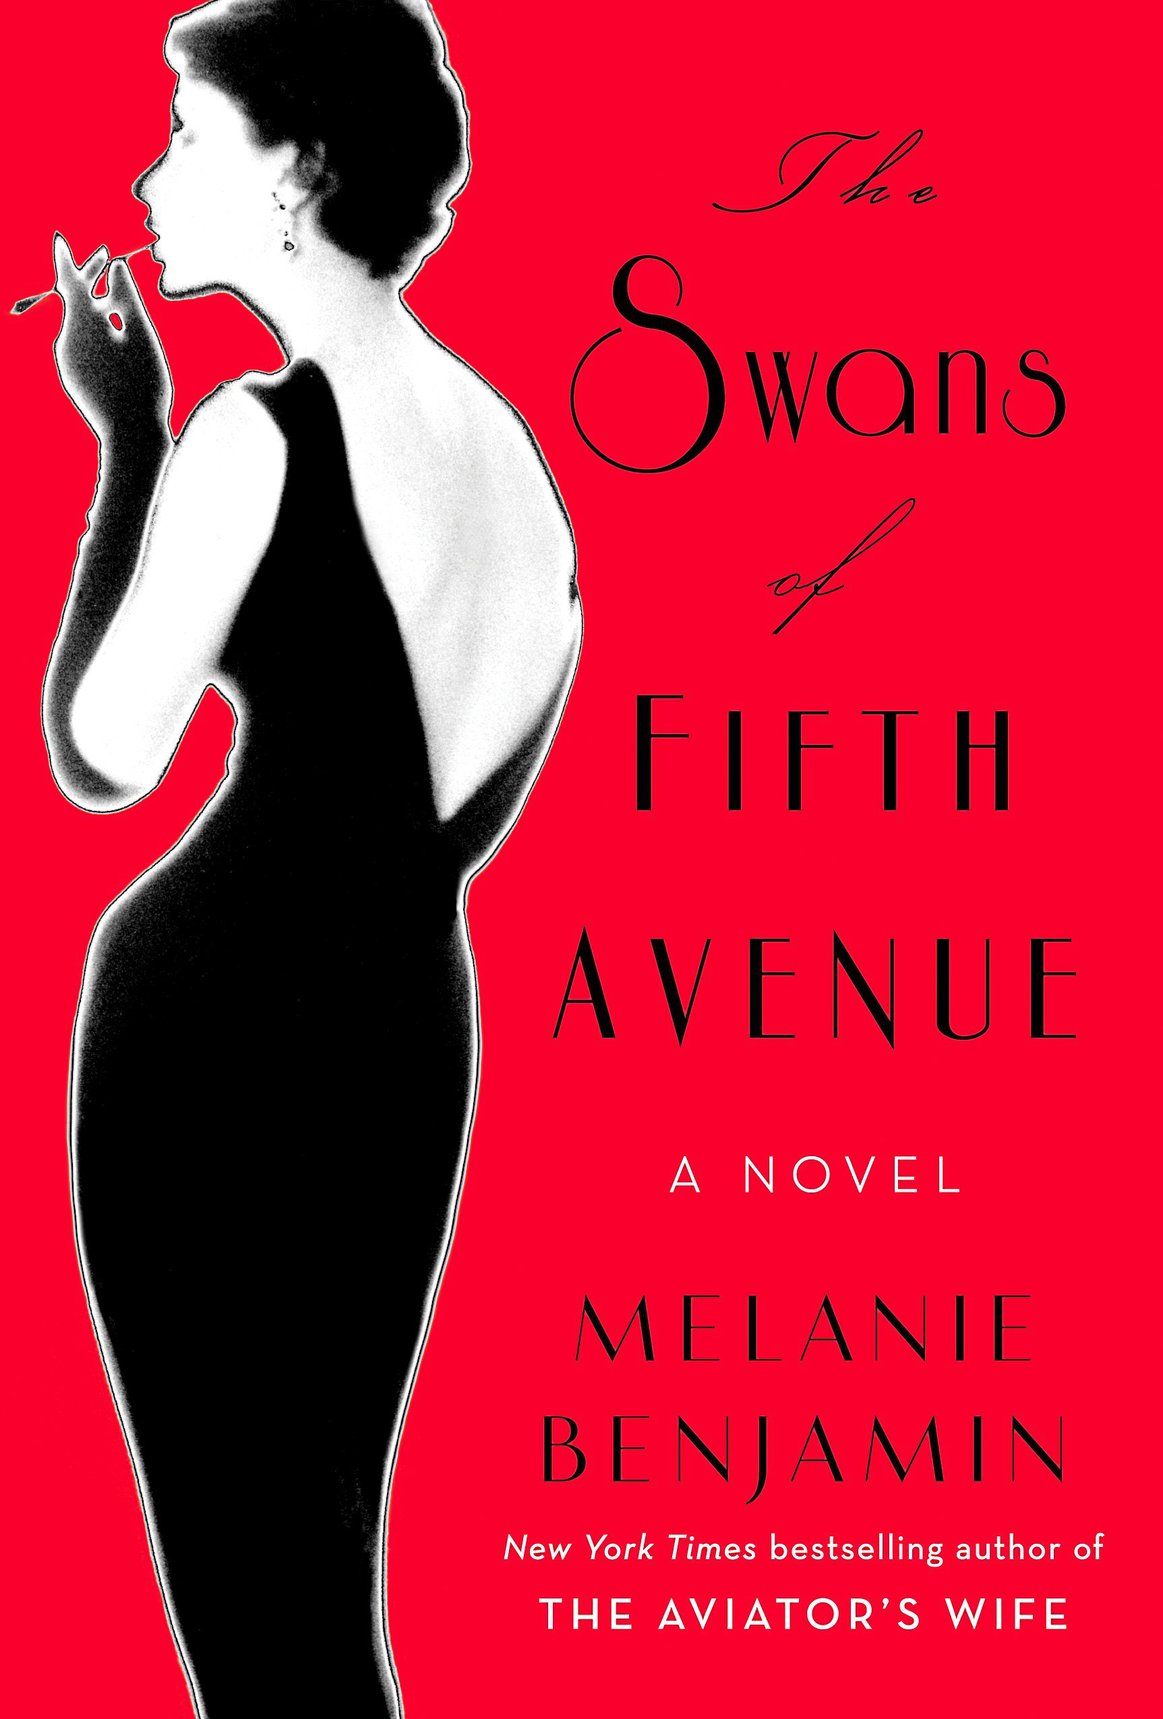 The Swans of Fifth Avenue (2016) by Melanie Benjamin